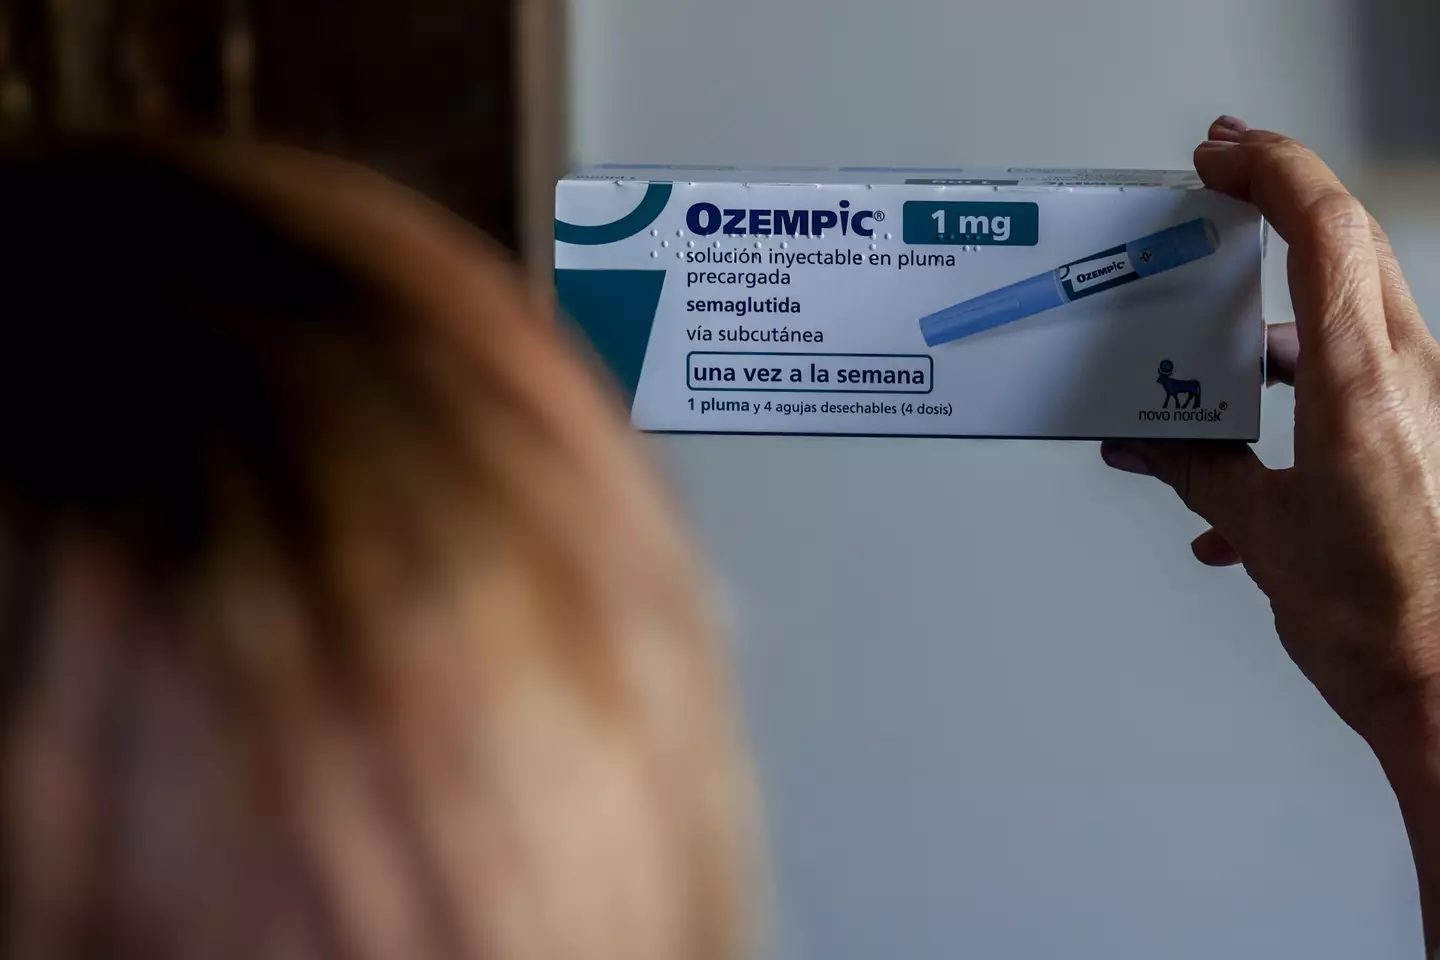 Ozempic is used in the treatment of diabetes.